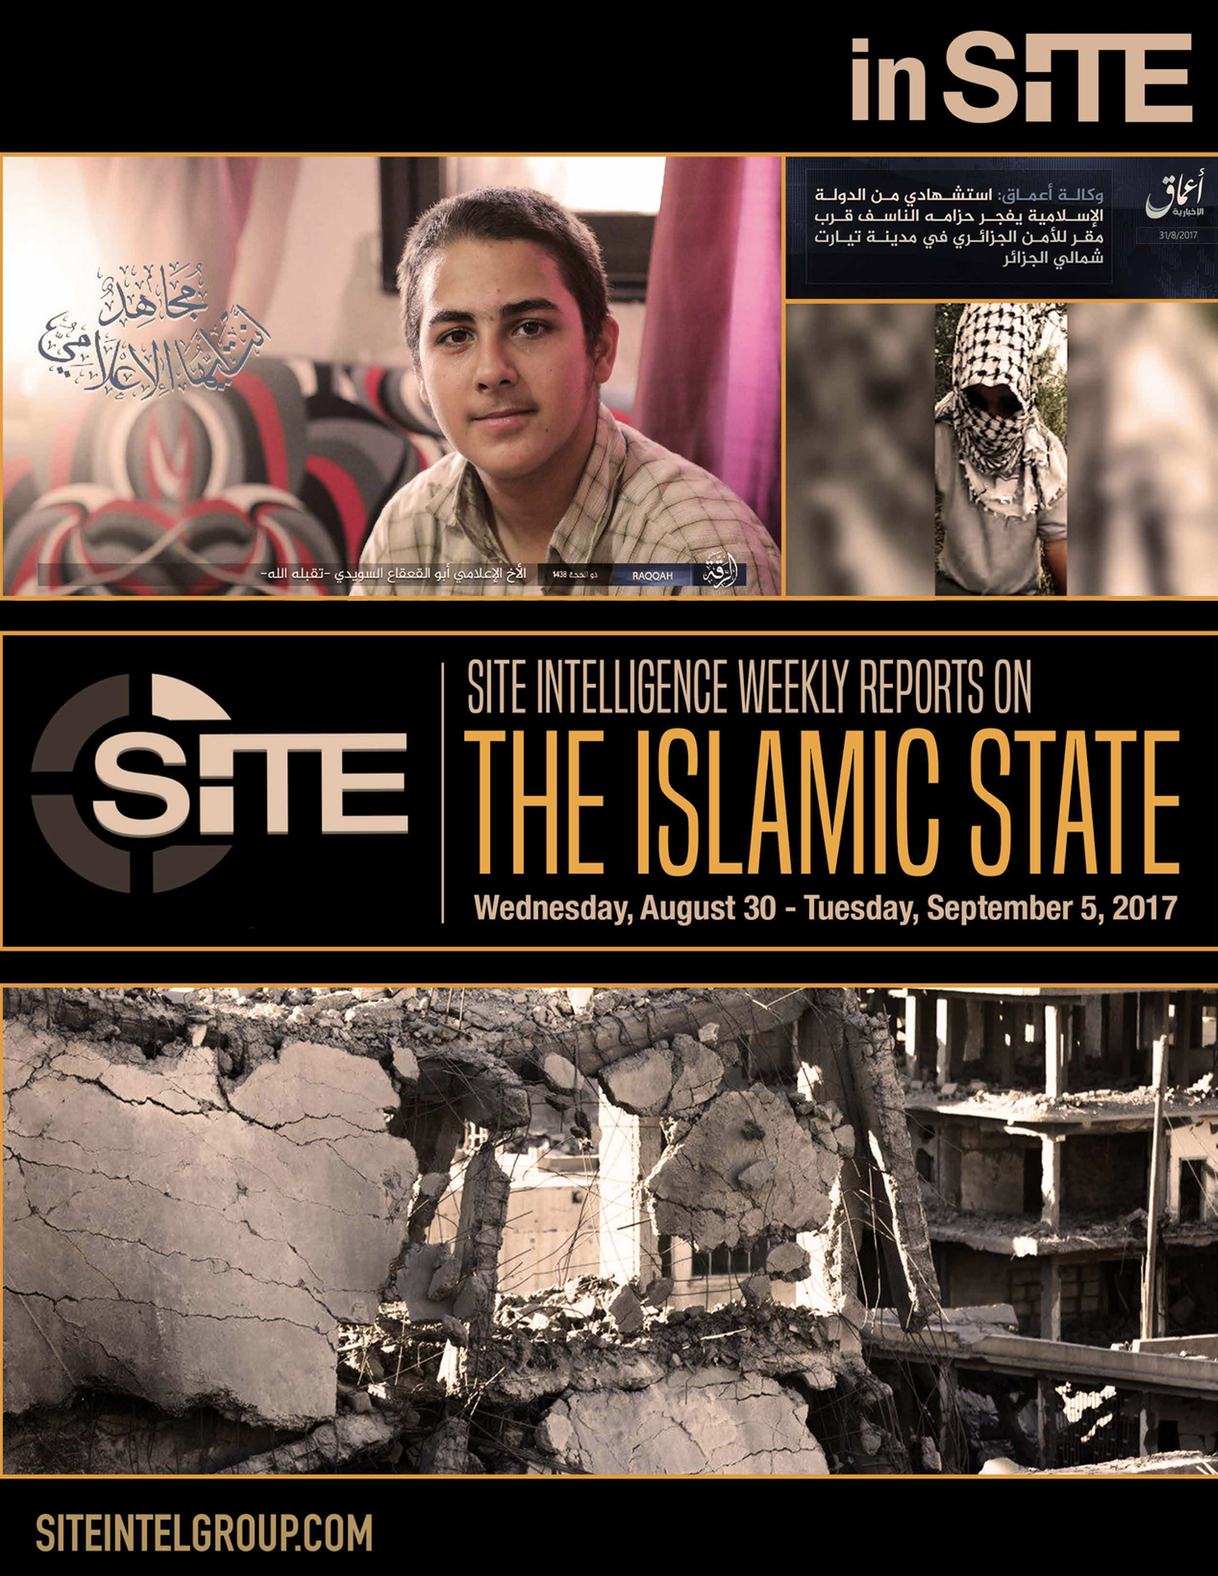 Weekly inSITE on the Islamic State, August 30-September 5